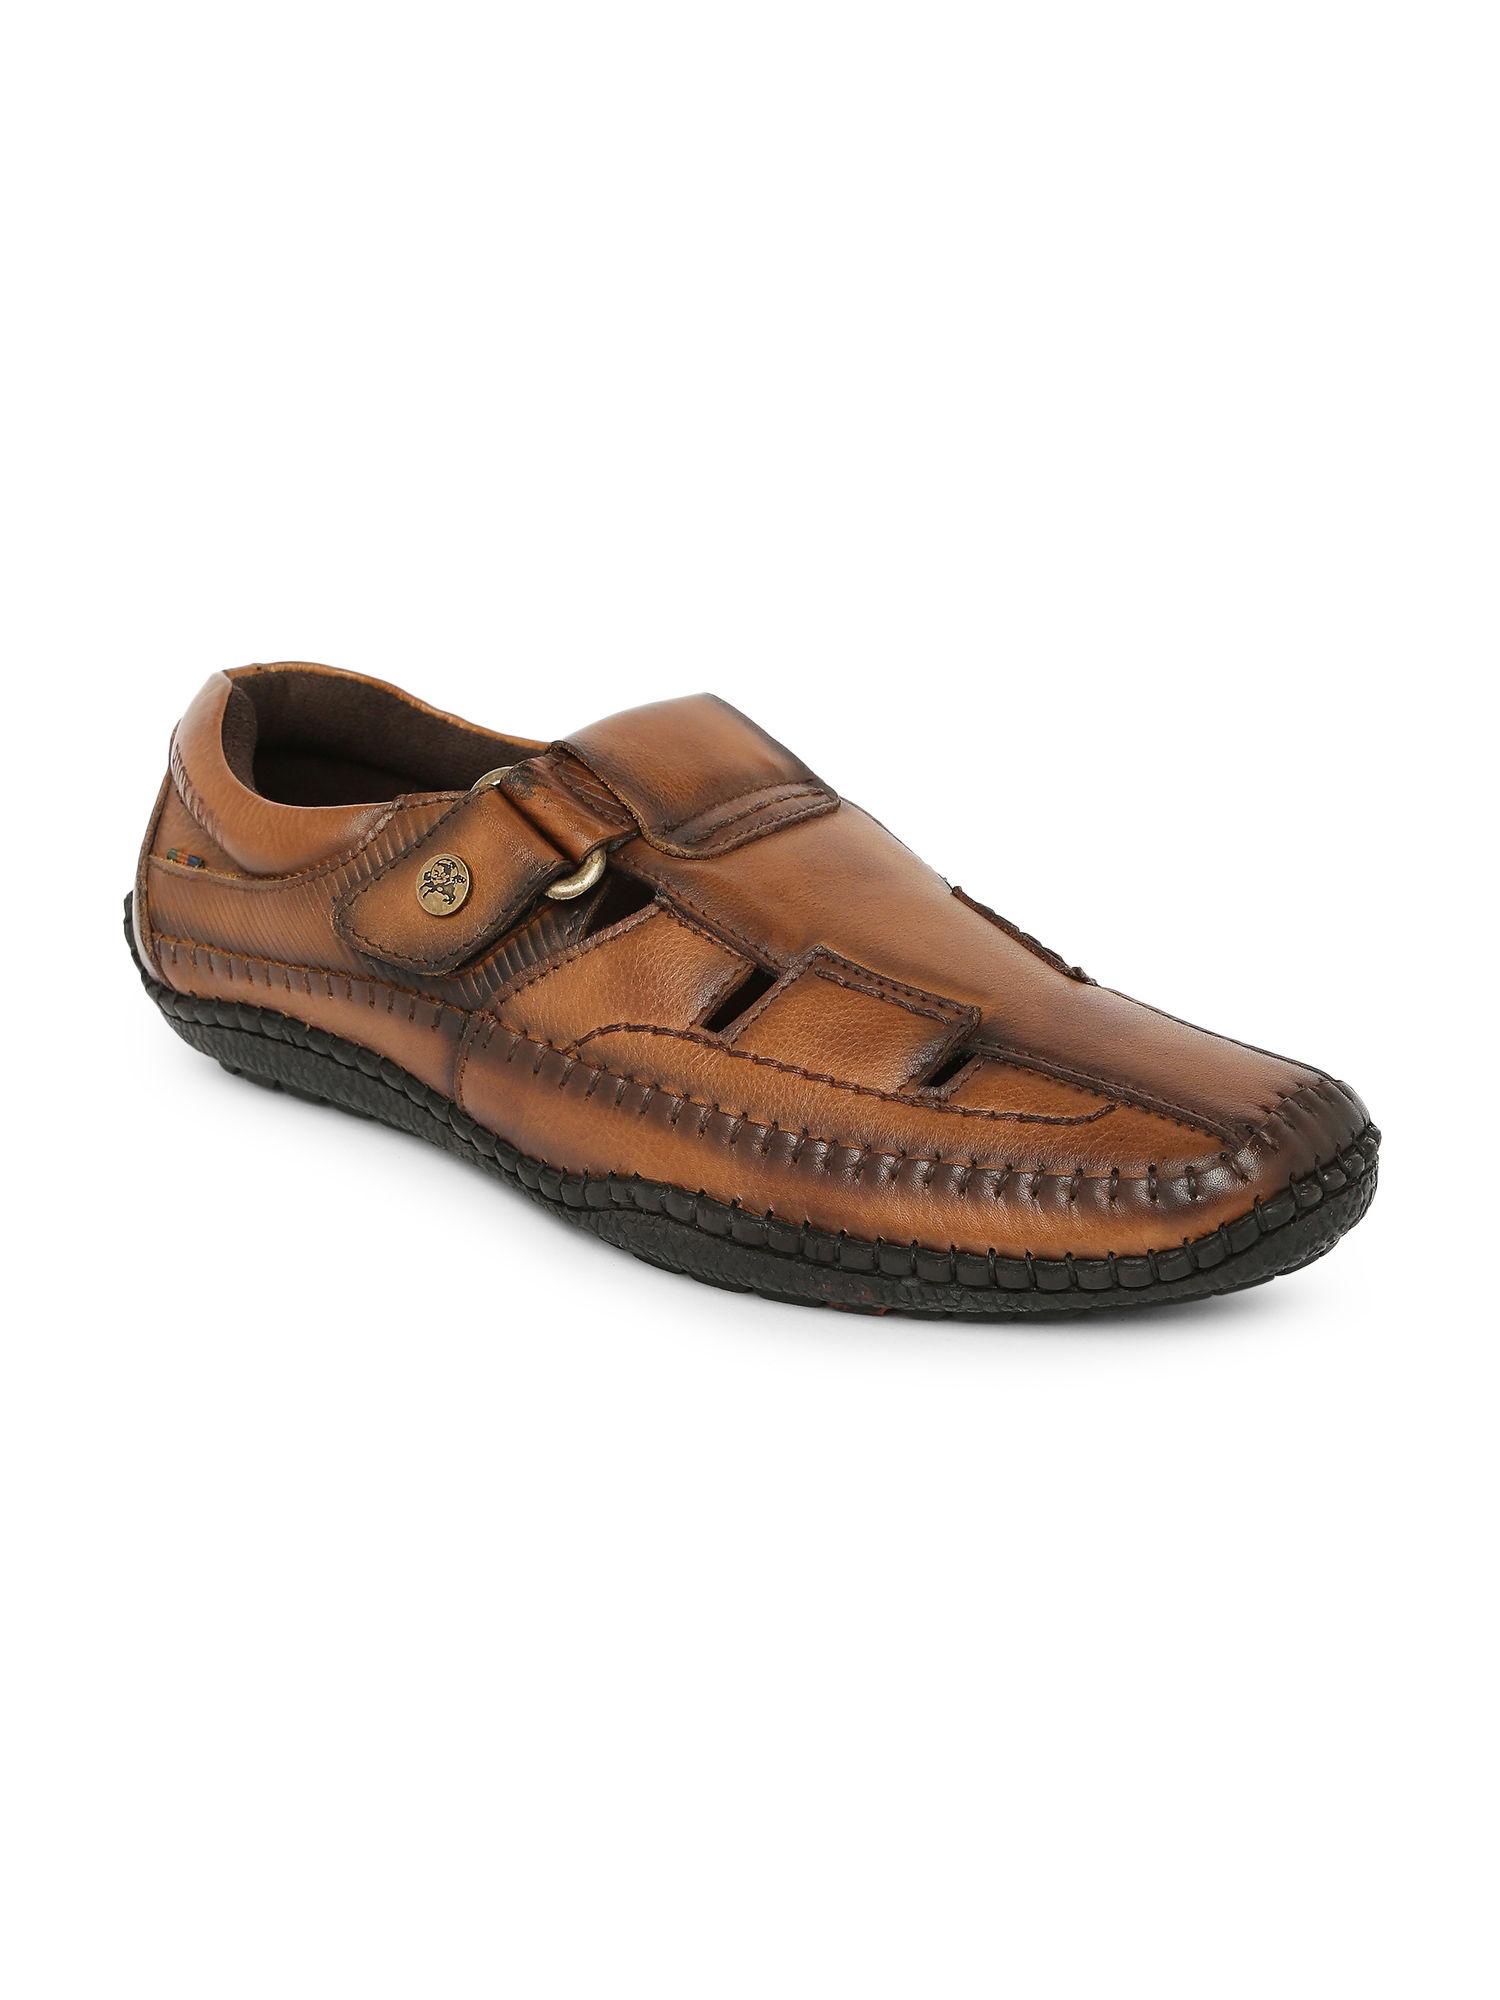 mens uv oilpul natural leather tan casual closed sandals